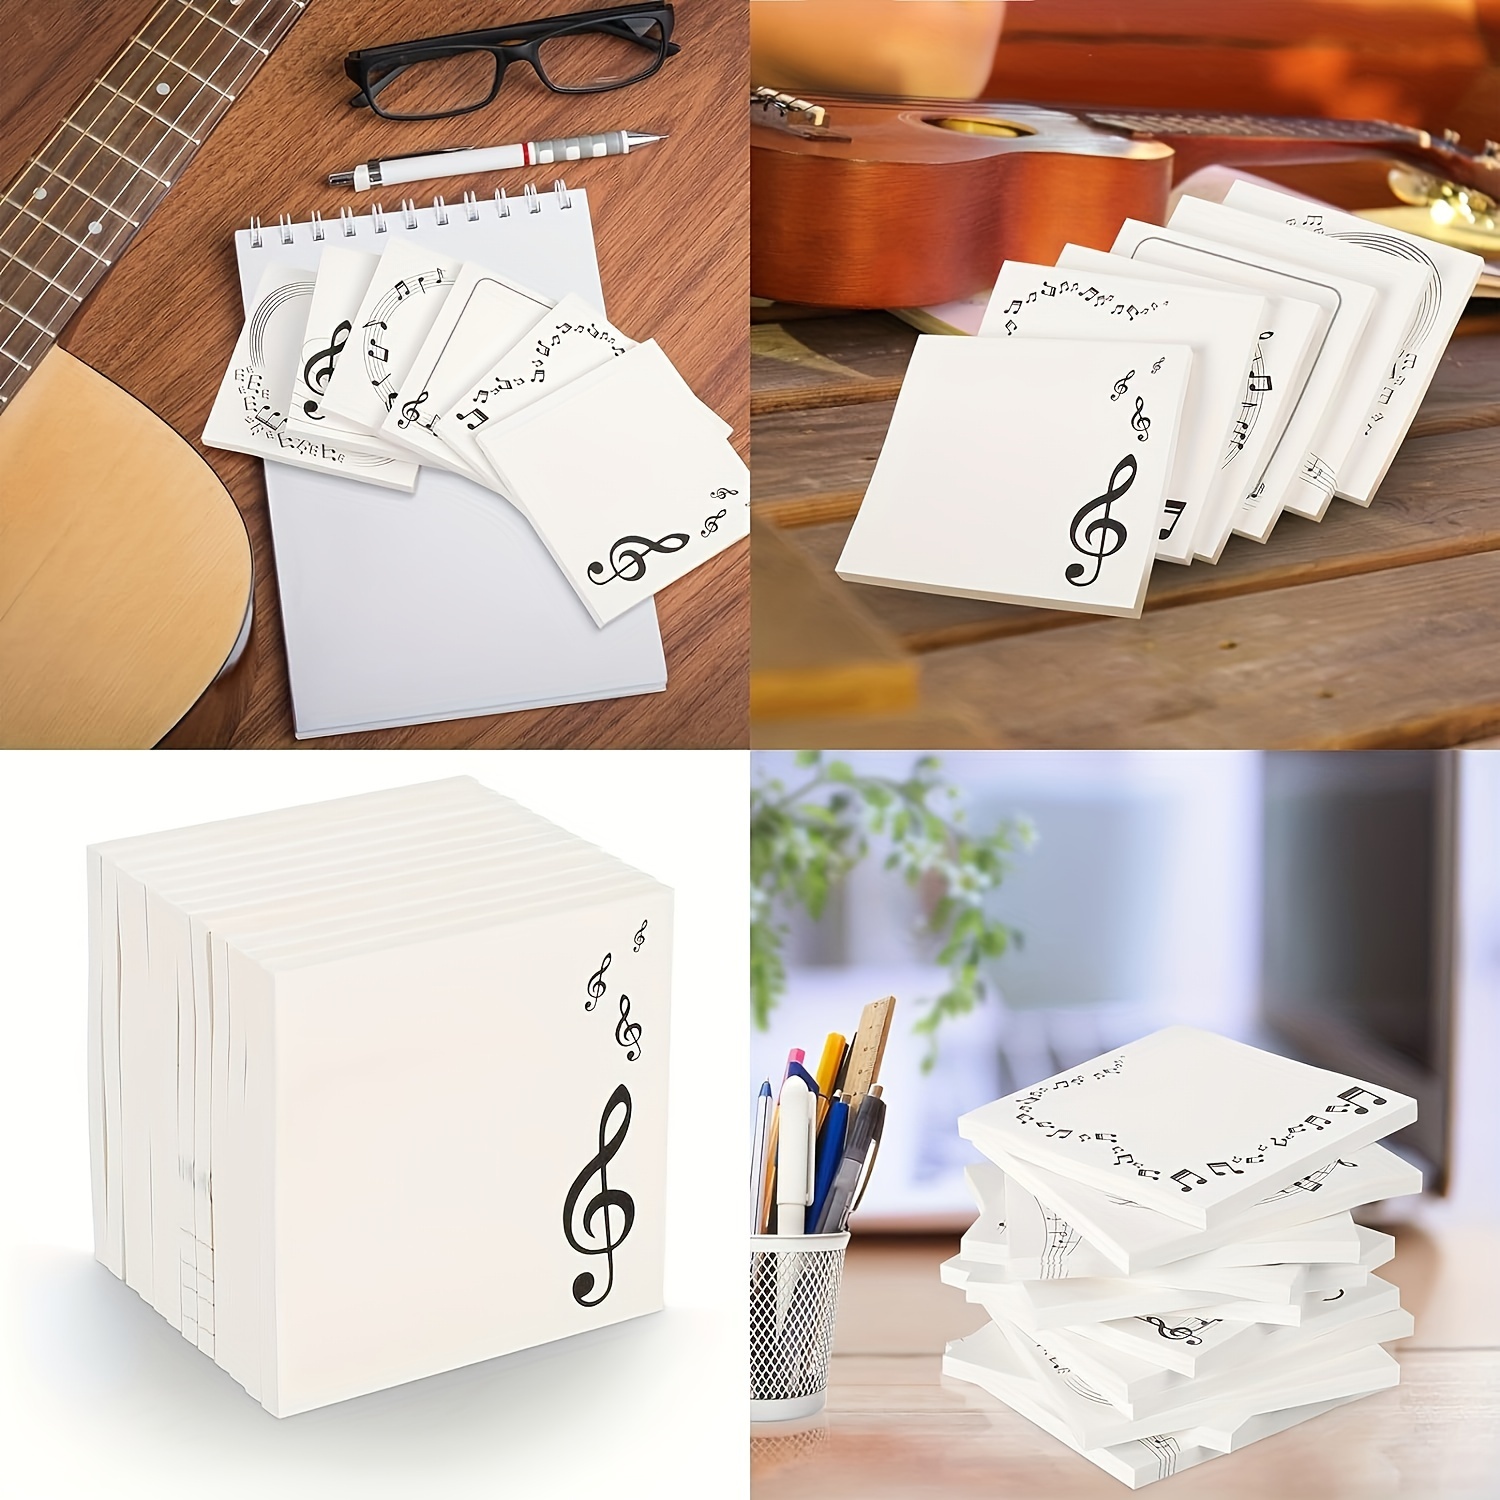 

6-pack Square Music-themed Sticky Notes - Adhesive Memo Pads With Clef & Piano Keyboard Designs For Messages, Office, School